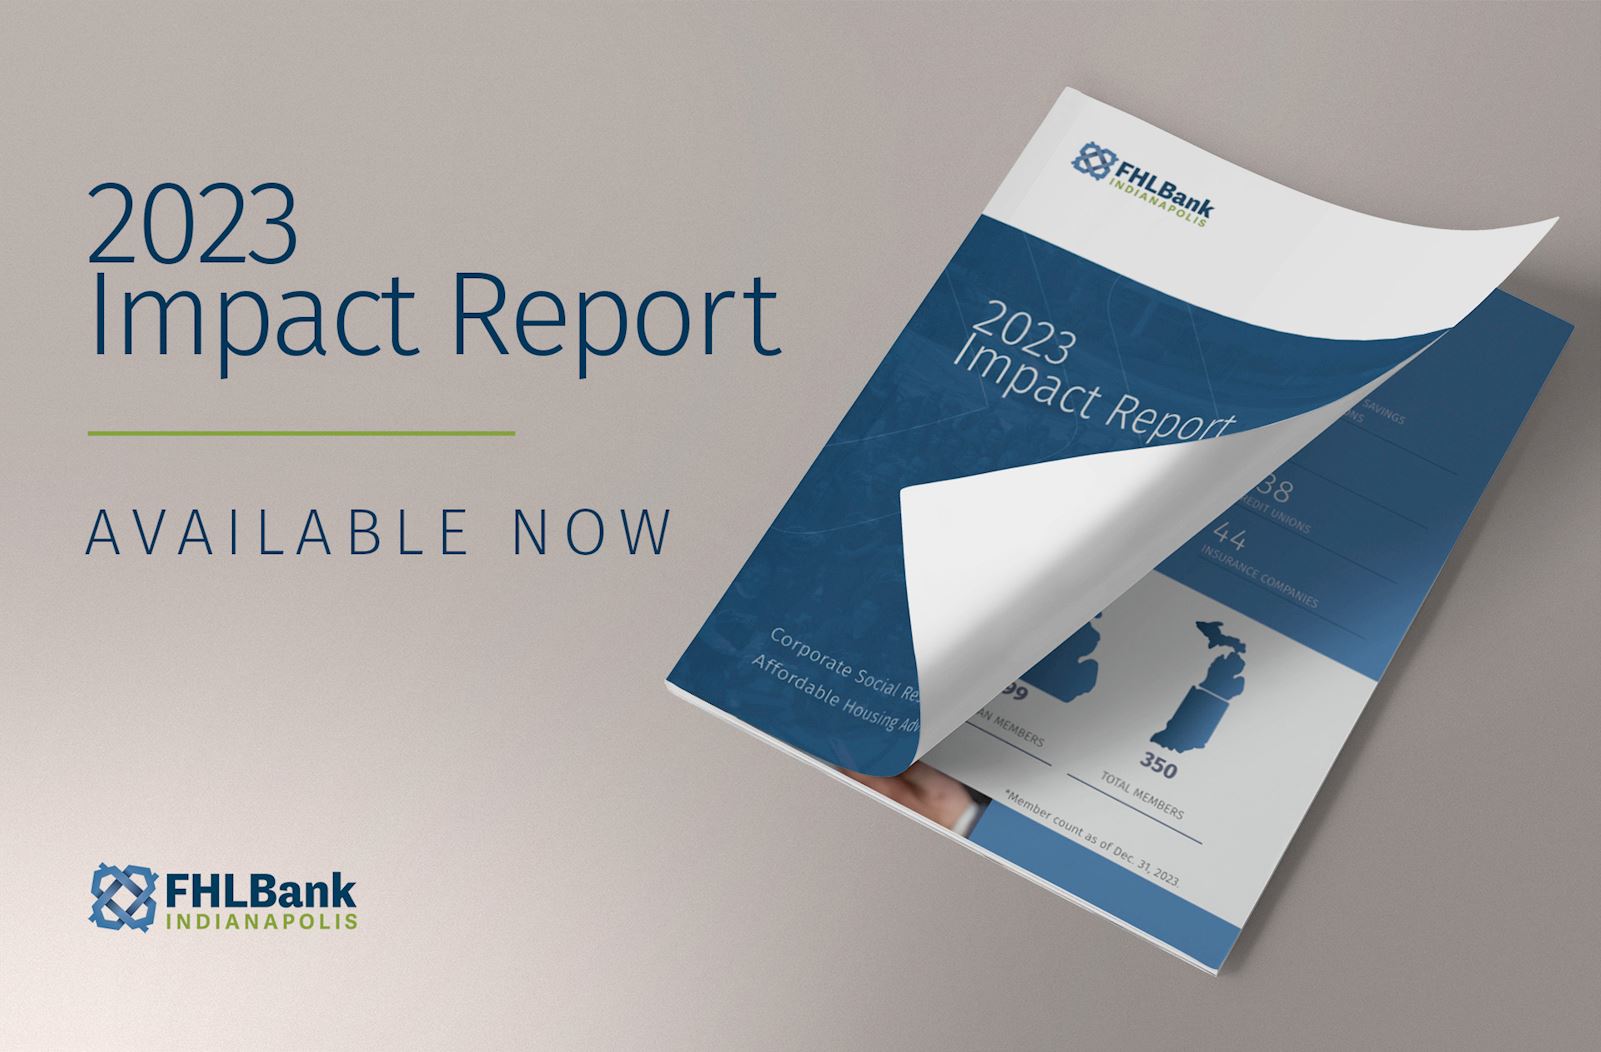 FHLBank Indianapolis releases 2023 Impact Report